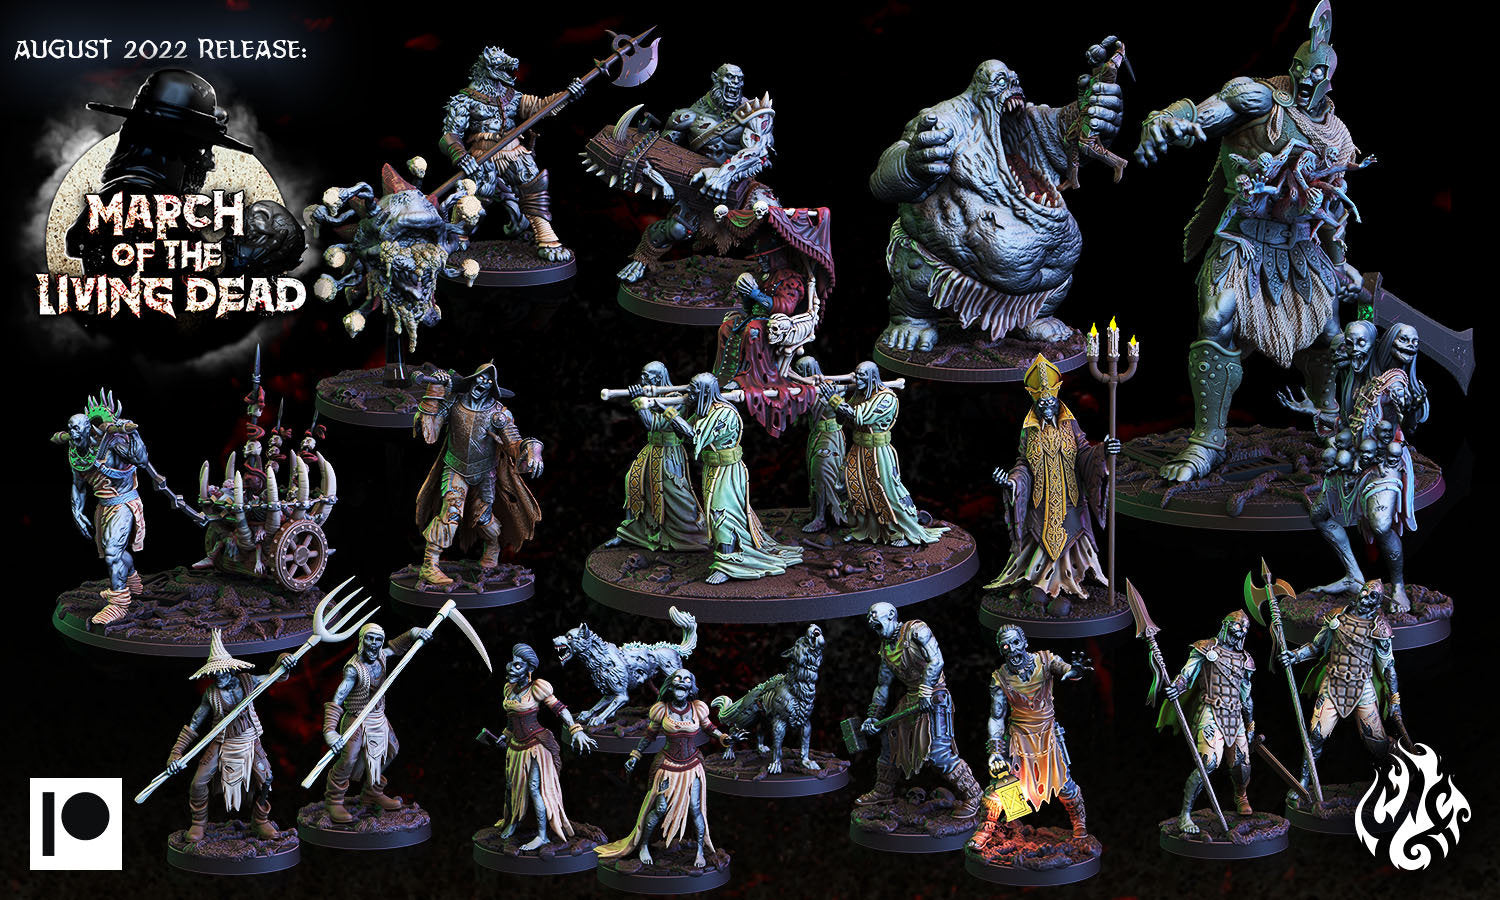 The Smith- Crippled God Foundry - March of the Living Dead 